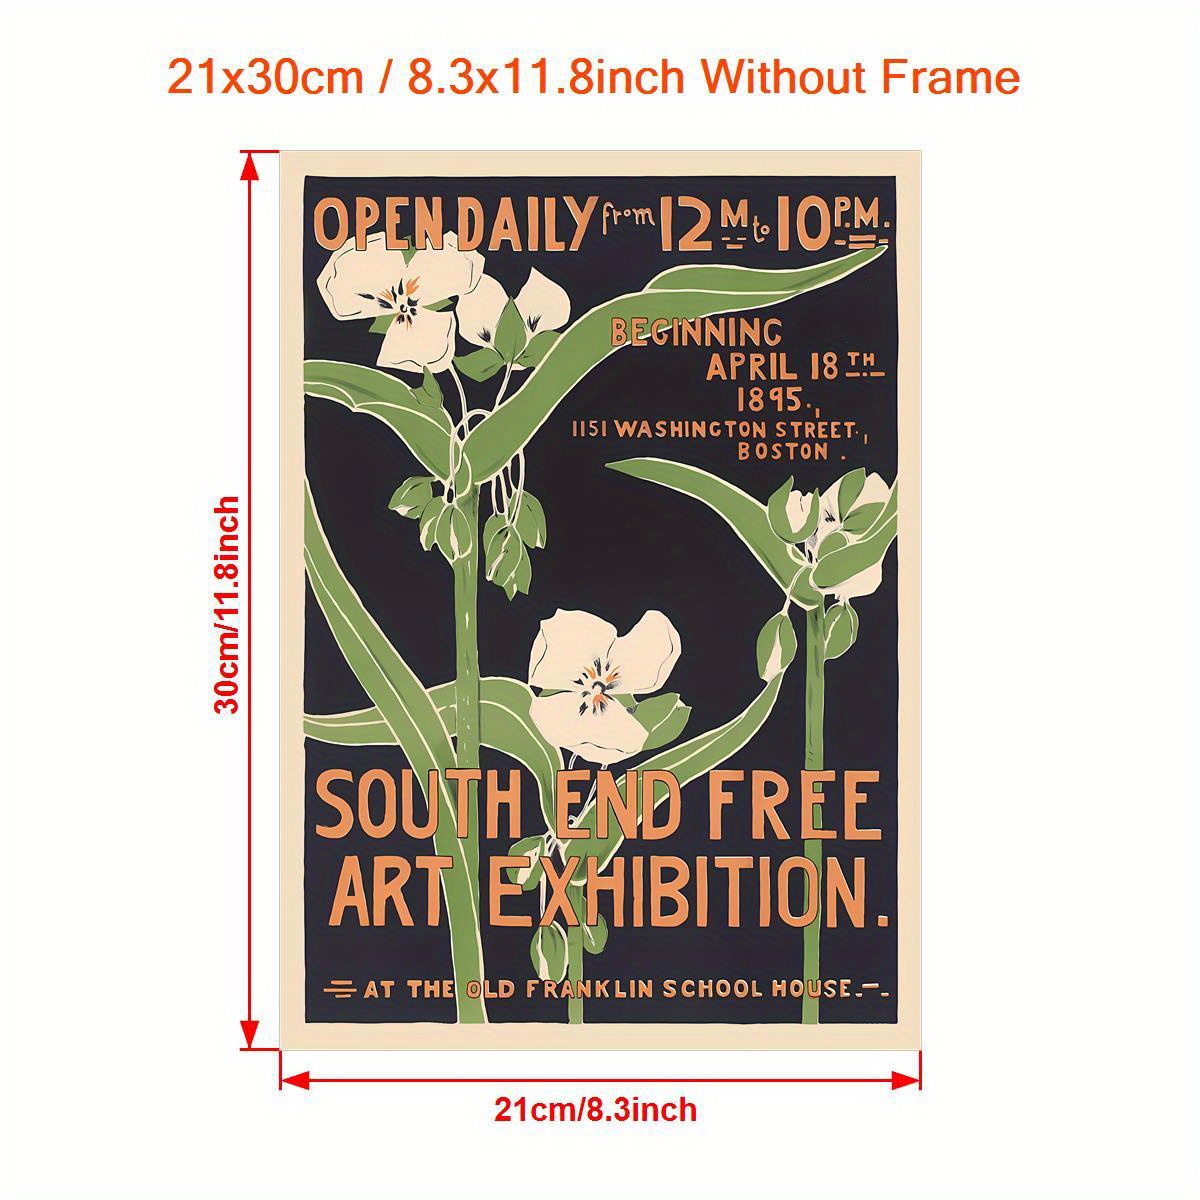 1pc canvas poster printed painting art nouveau print retro poster floral art print wall decor home room decor wall art unframed